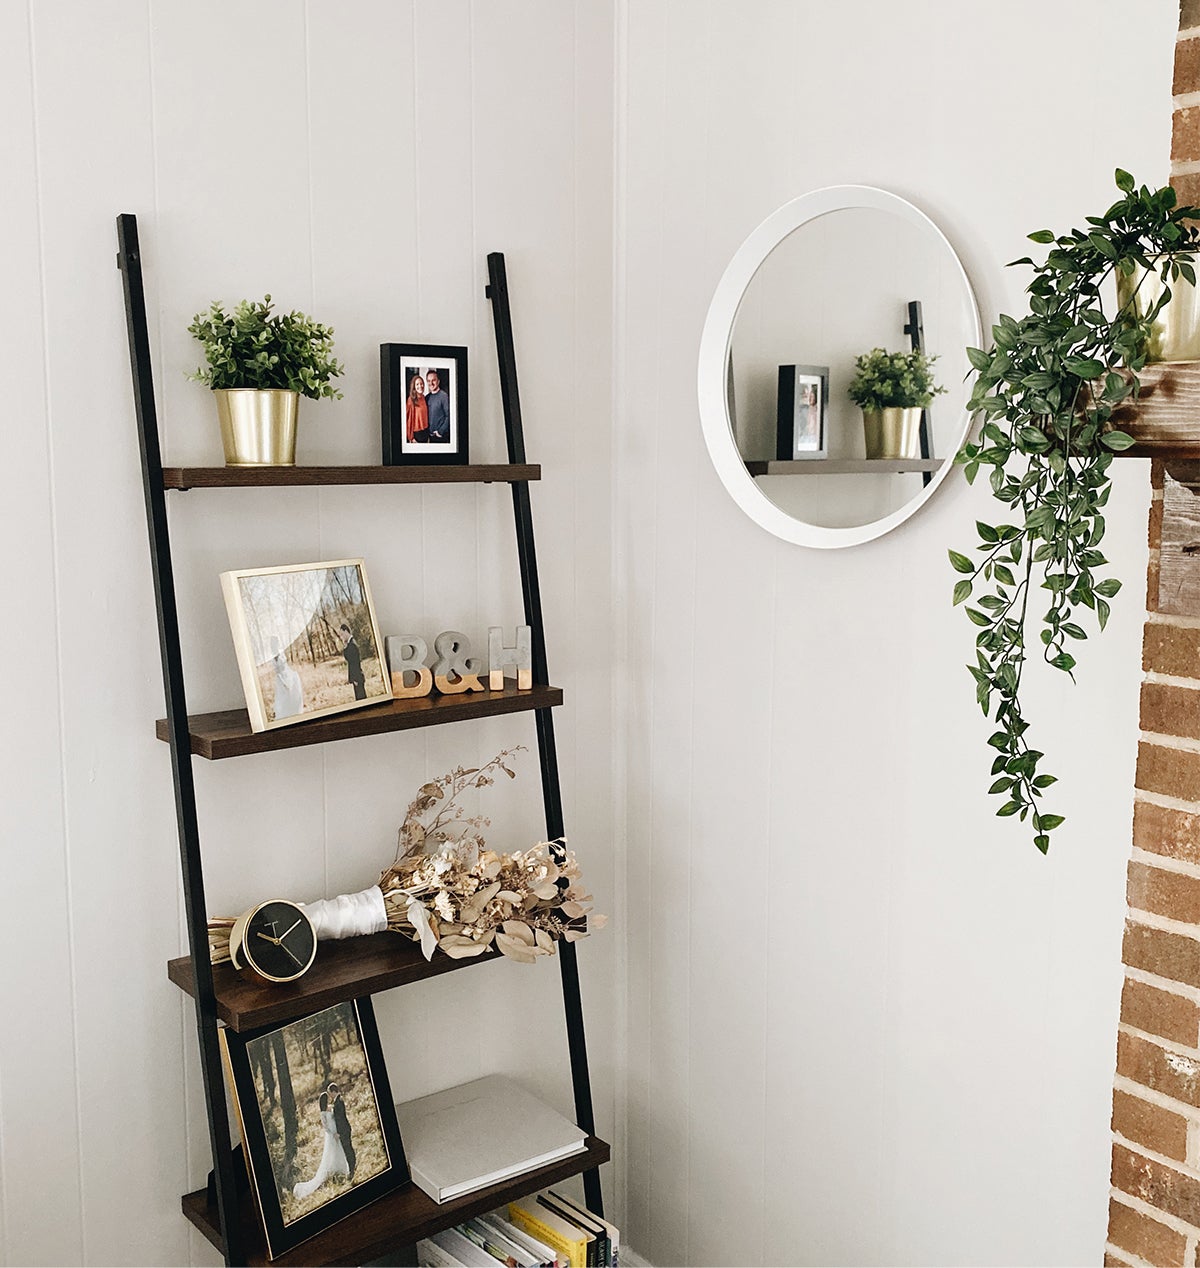 Photo by Brian Schindler of shelving display with photos frames and small plants